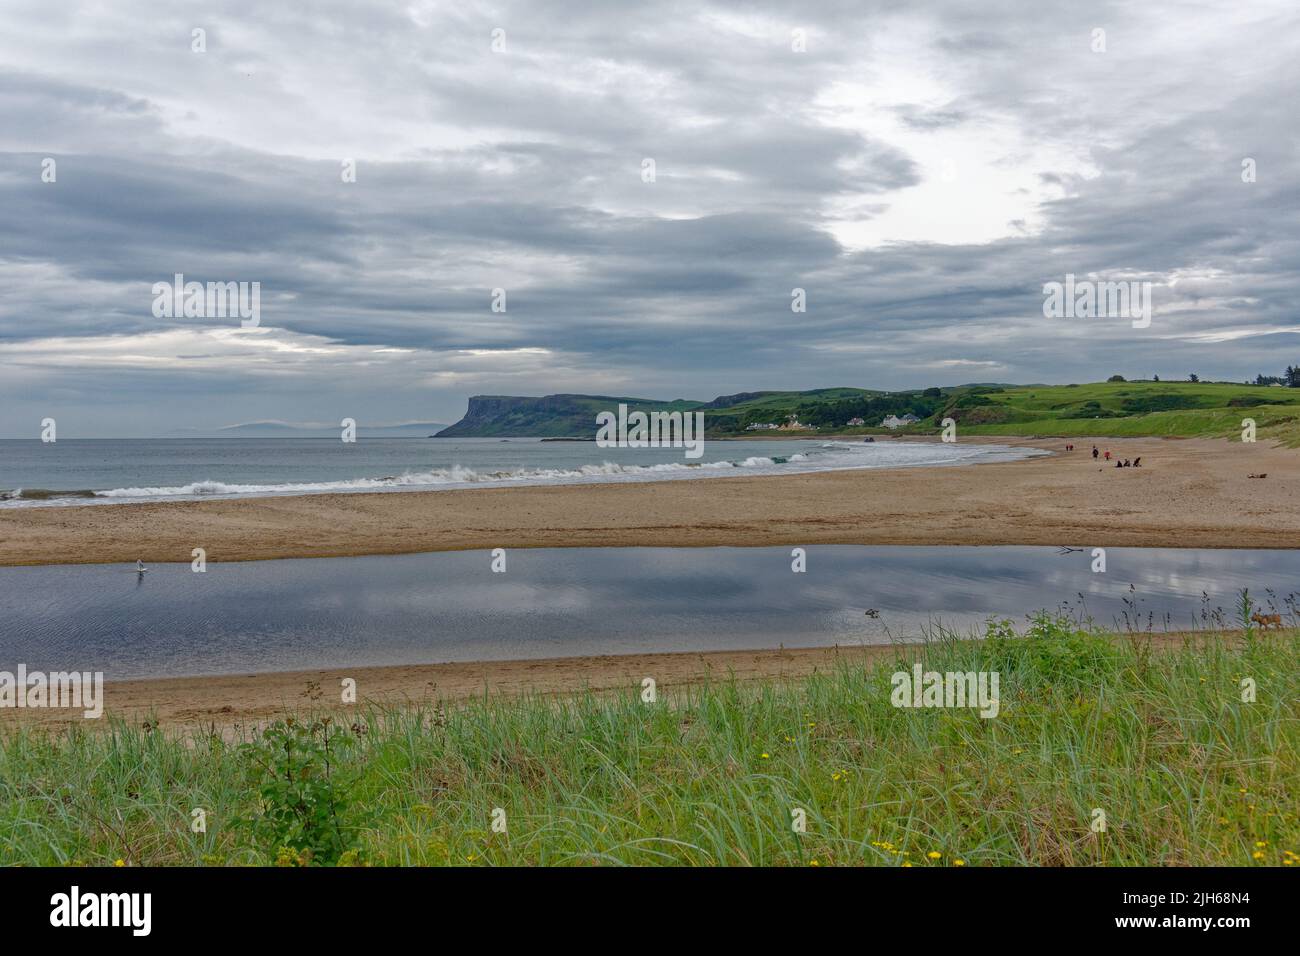 View of Fairhead from the beach at Ballycastle in County Antrim, Northern Ireland Stock Photo